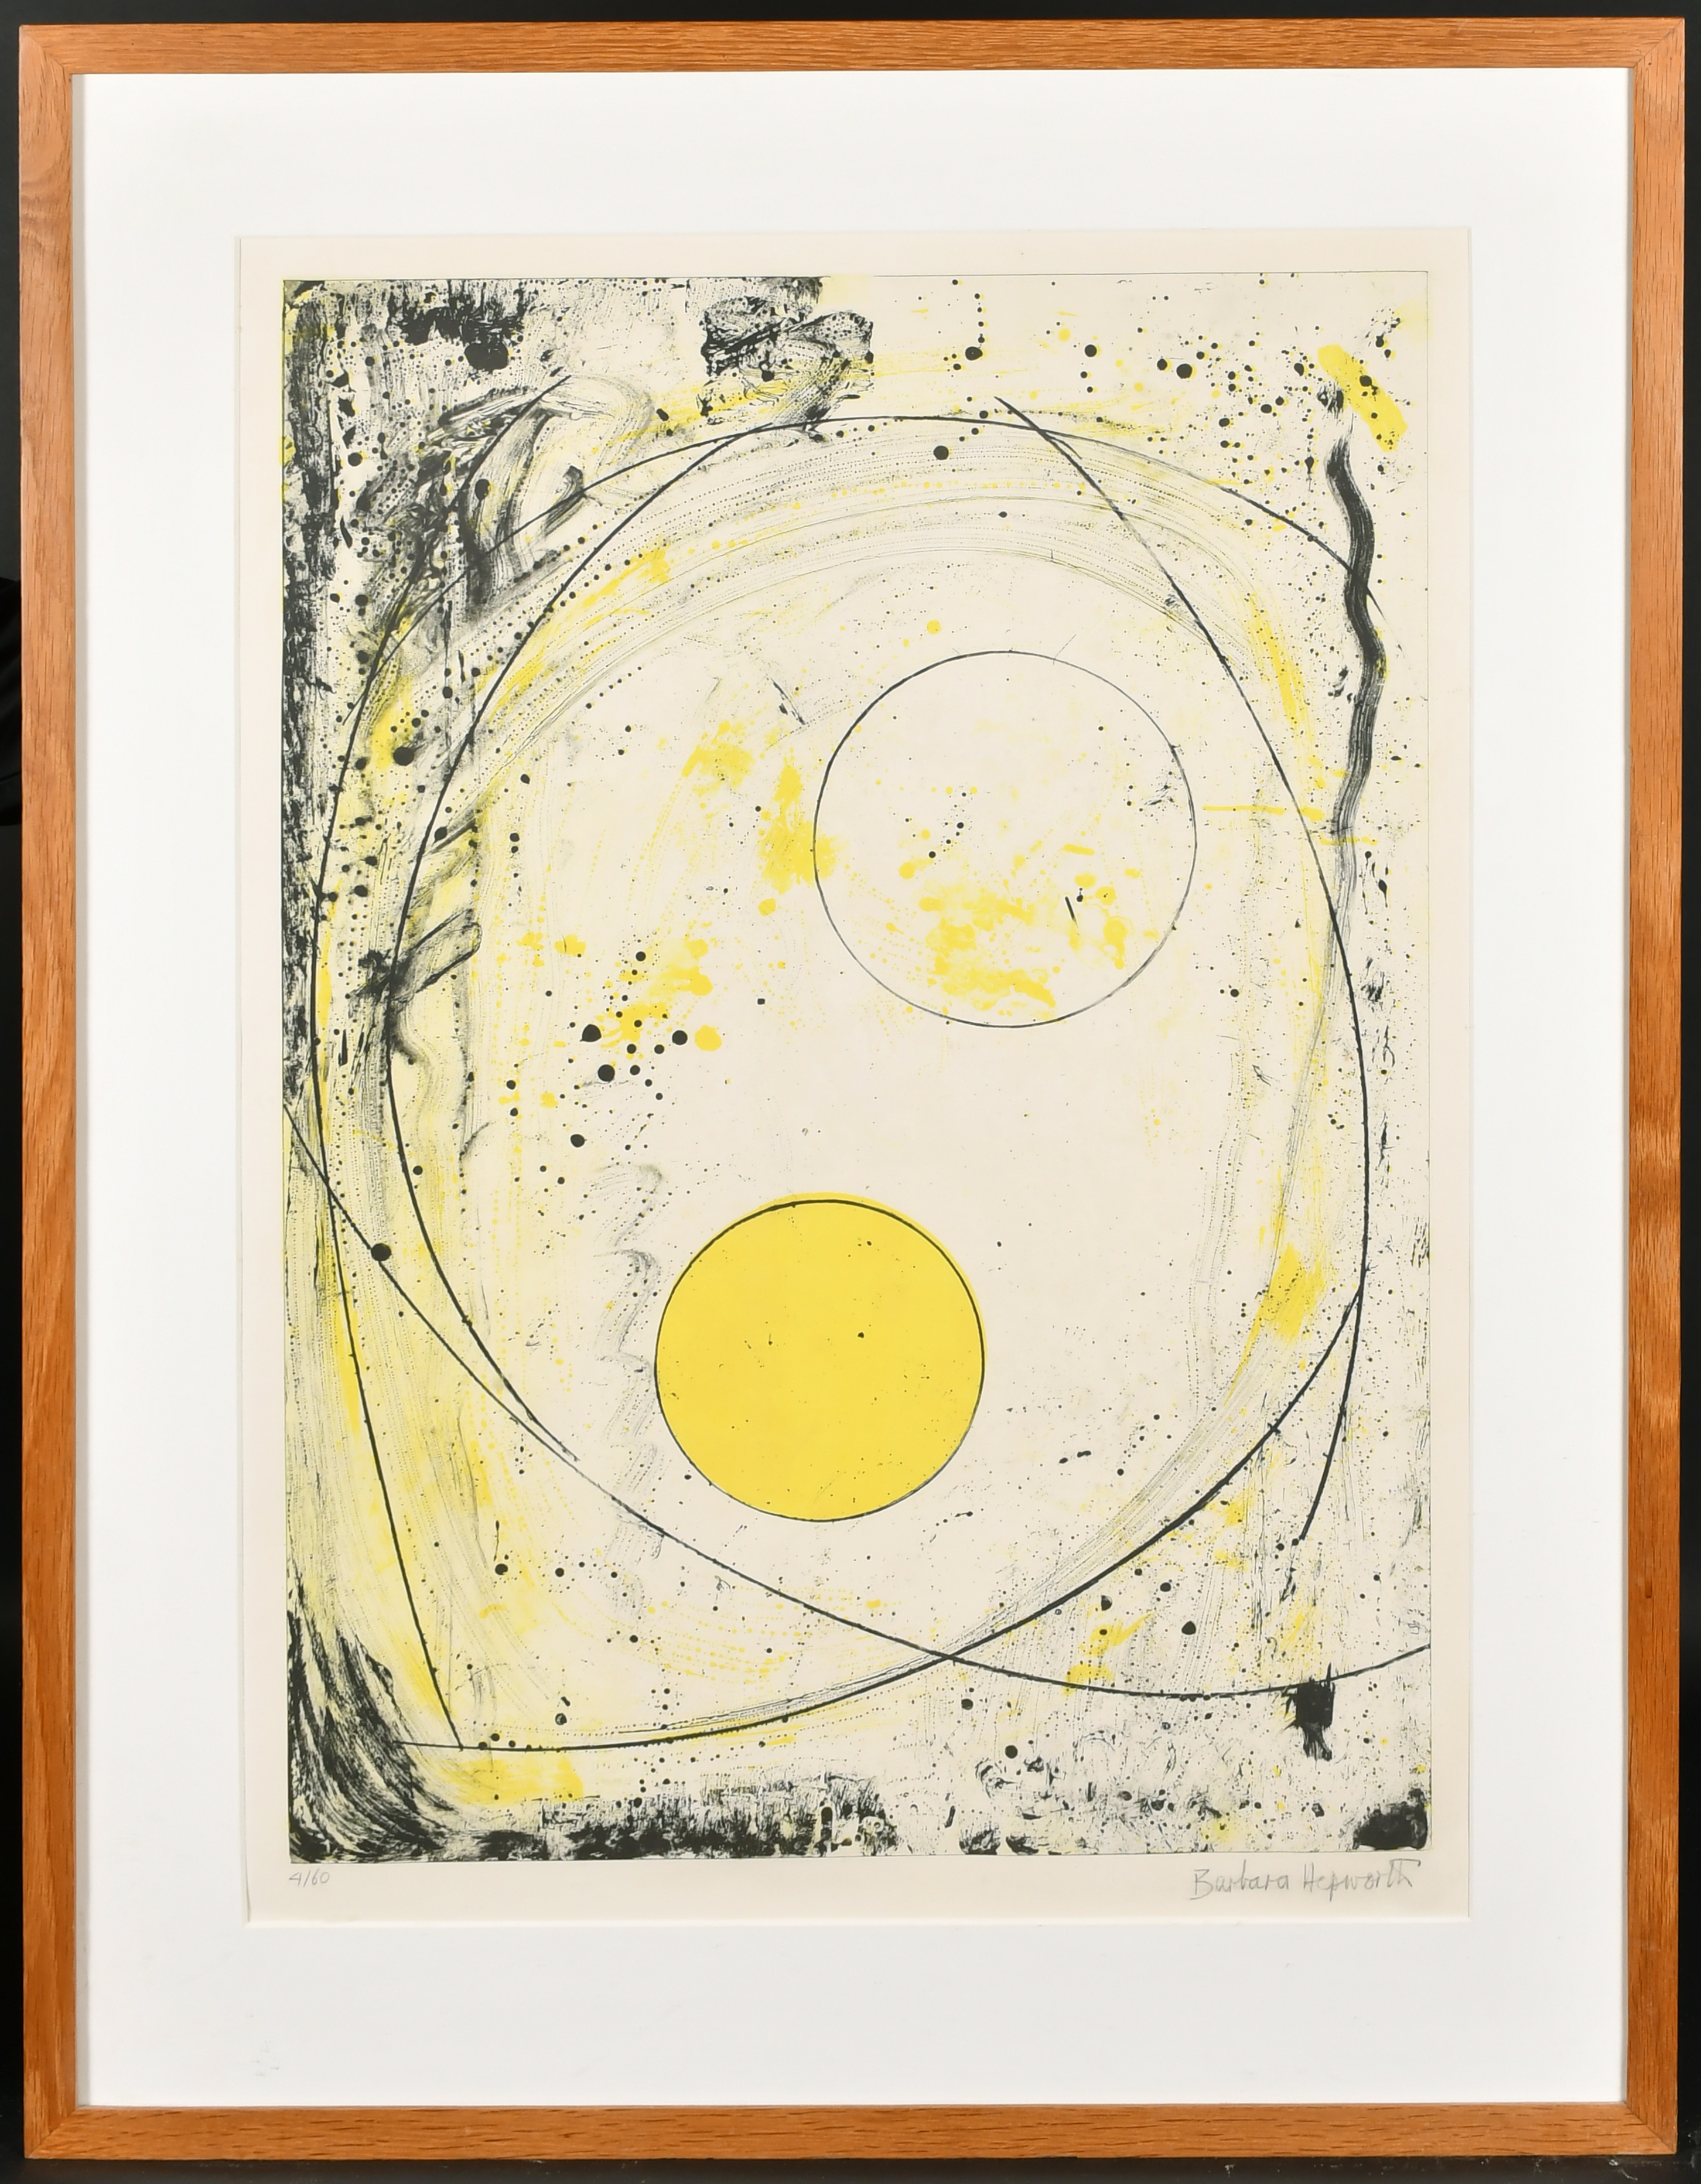 Barbara Hepworth (1903-1975) British. "Pastorale", Lithograph, Signed and numbered 4/60 in pencil, - Image 2 of 6